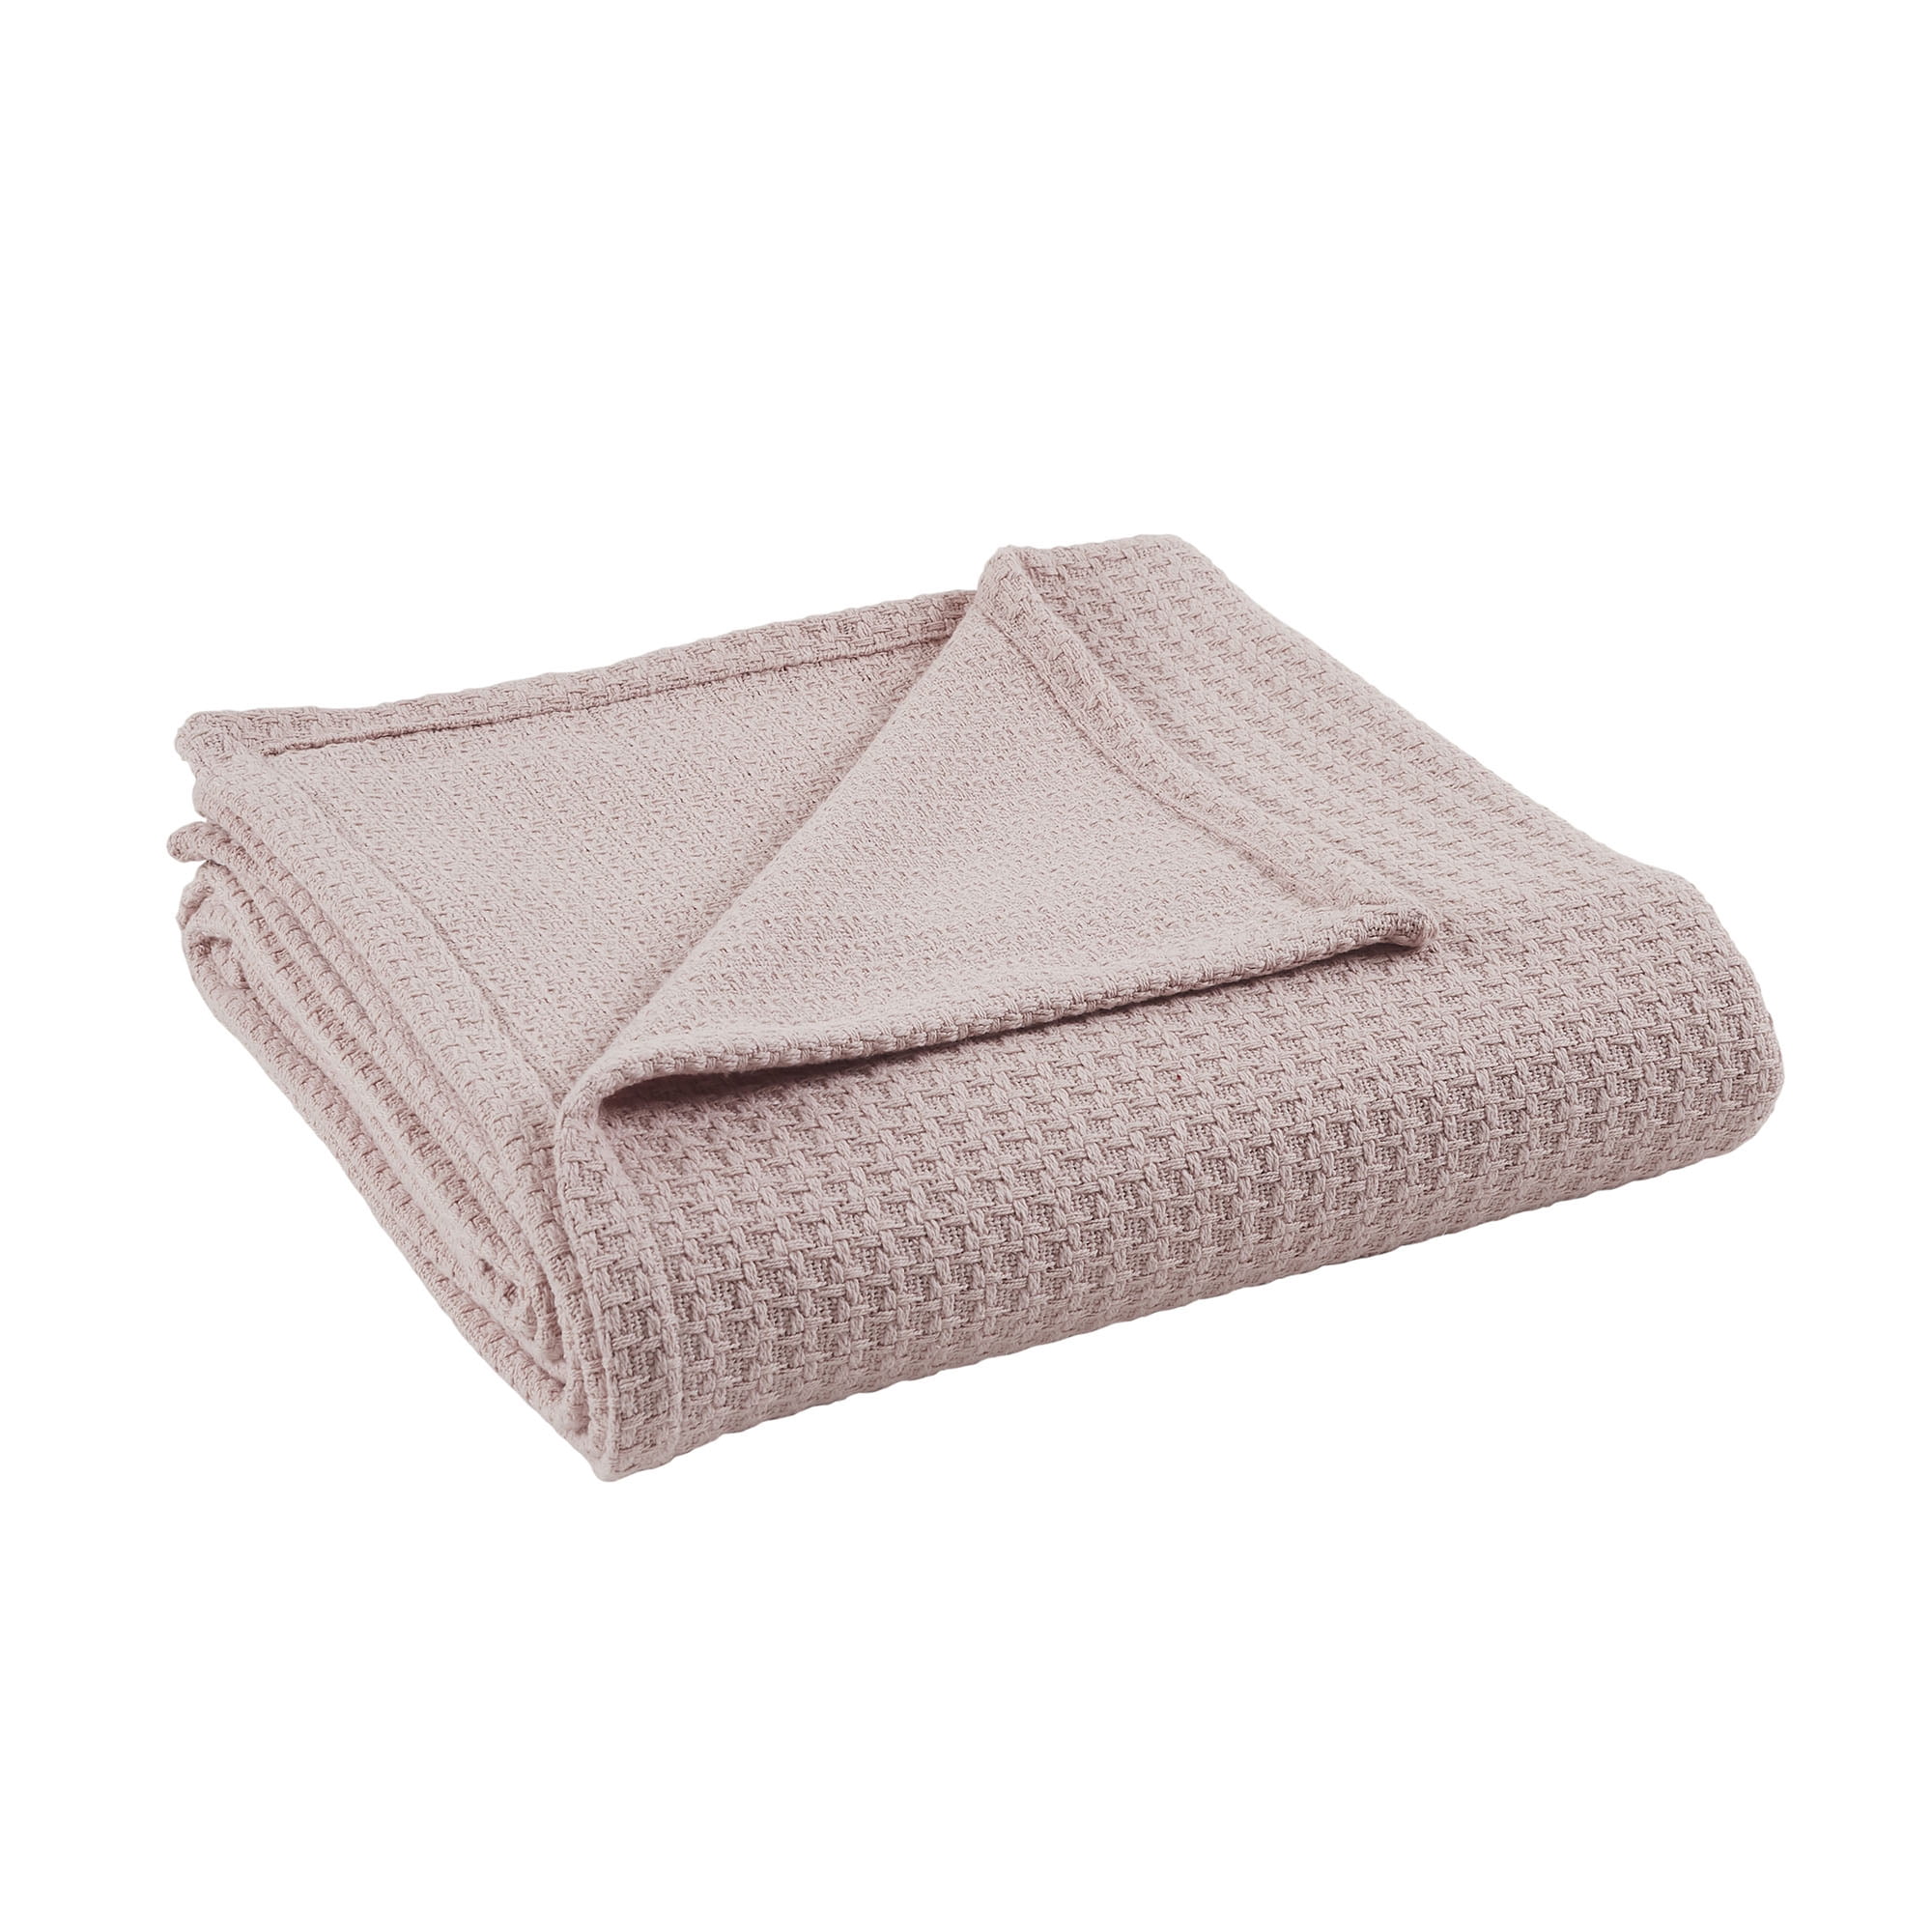 Modern Thread White Waffle Weave 100% Cotton Adult Thermal Blanket